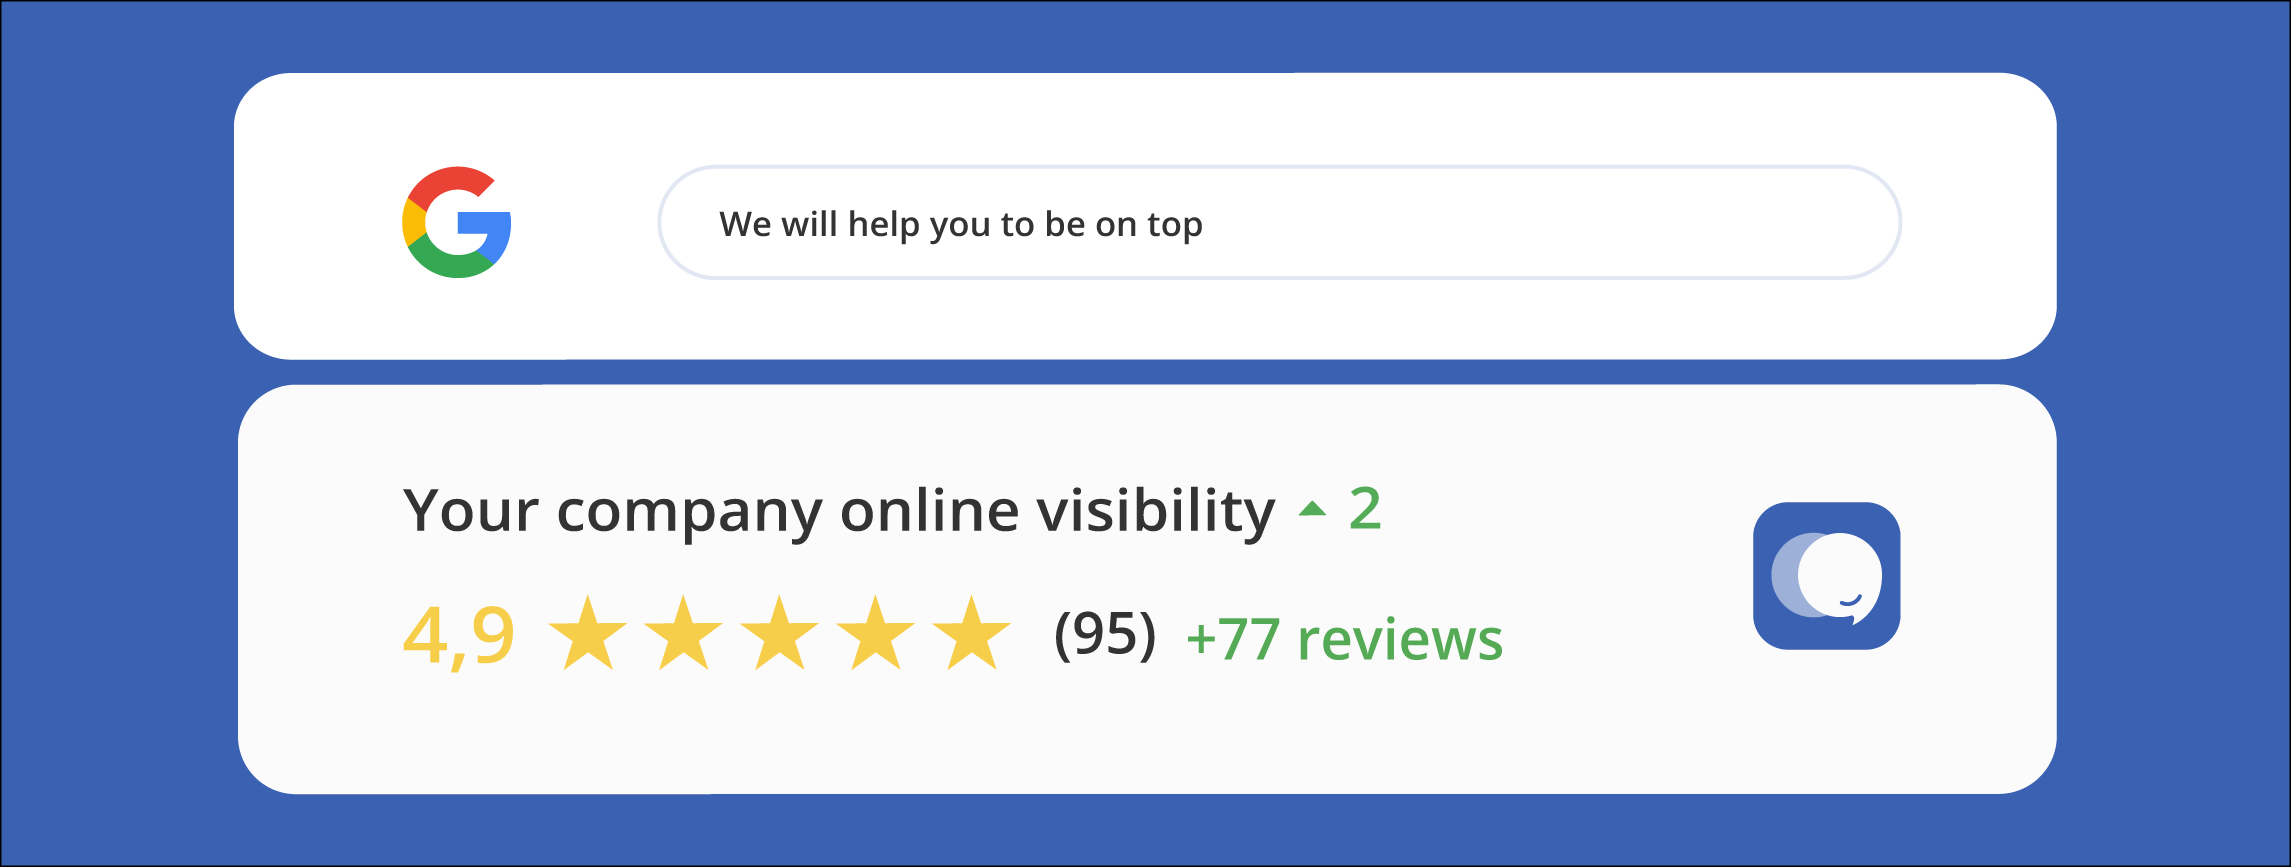 Reviews And SEO: How To Get More Clicks And Show Up On The First Page Of Google